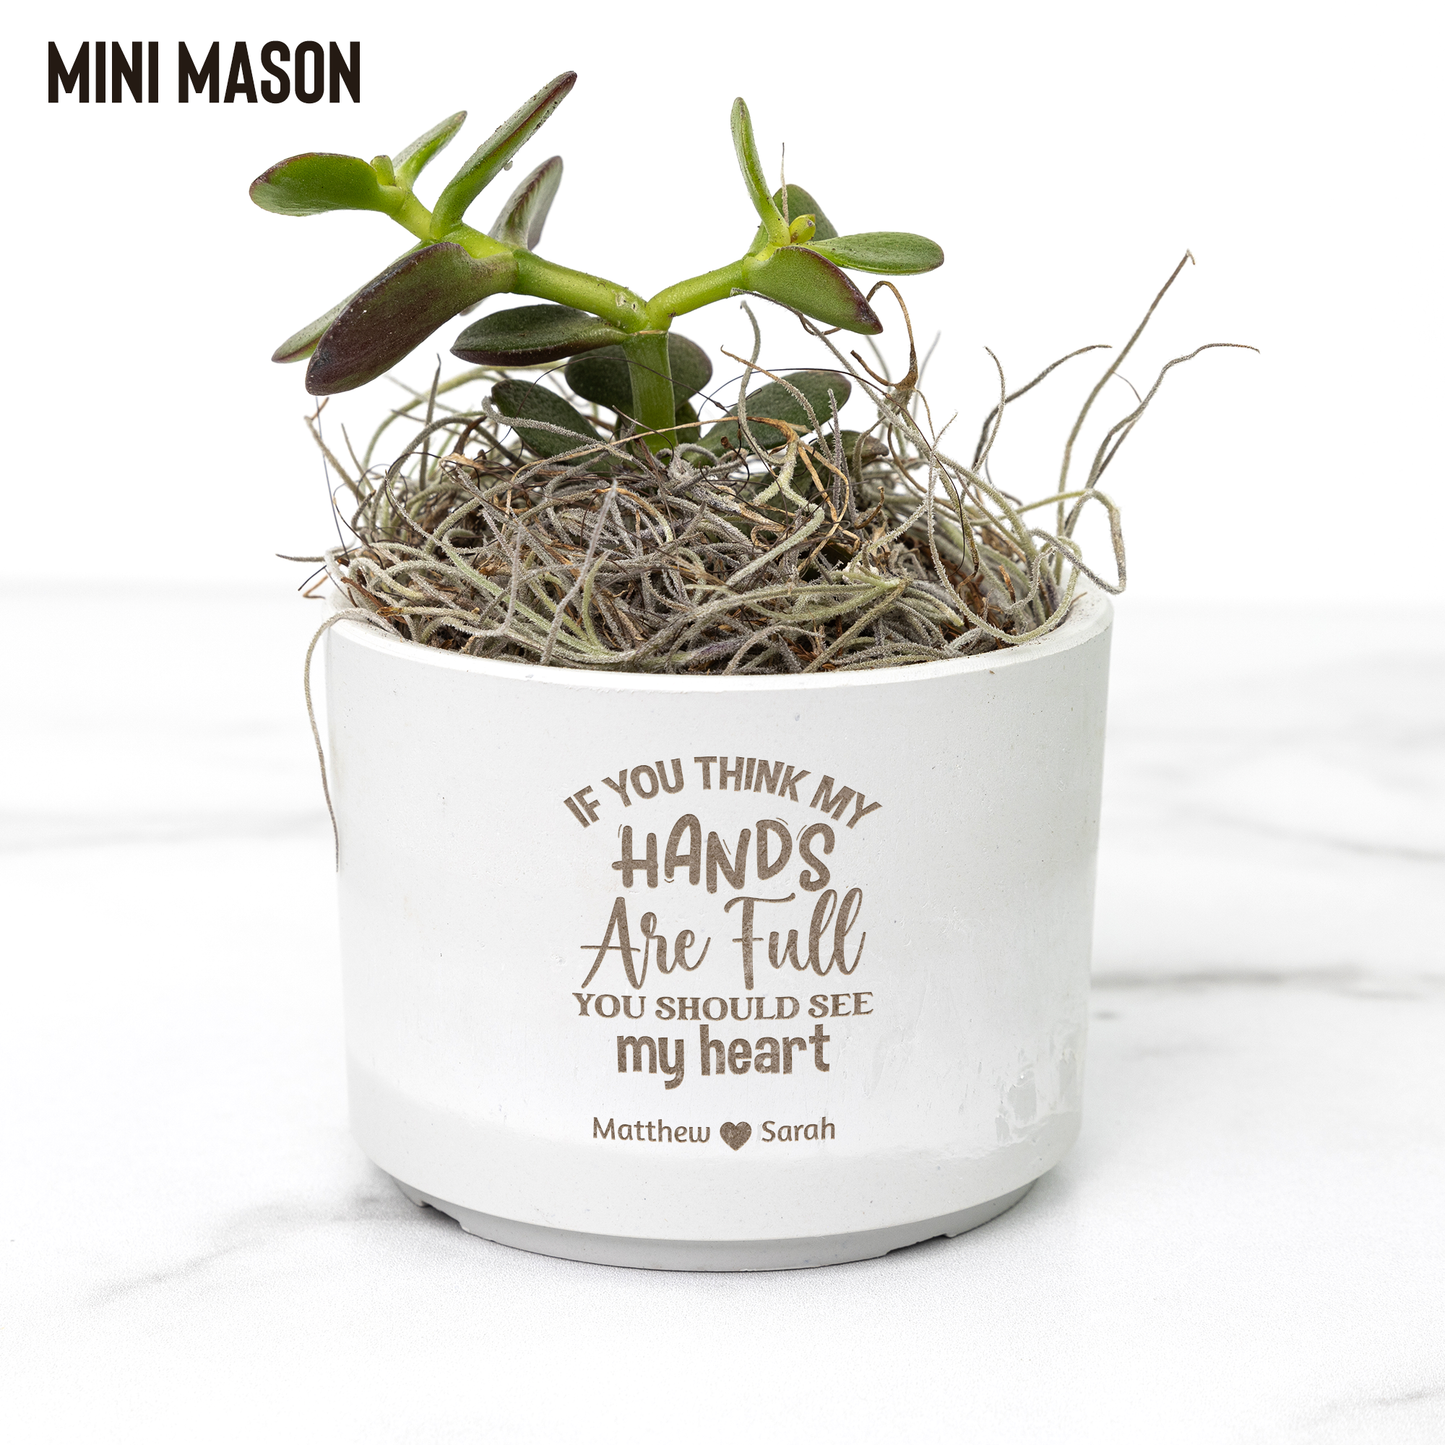 Personalized Desk Plant for Mom Gift for Mother's Day, Birthday Gift for Mom, Gift for Grandma